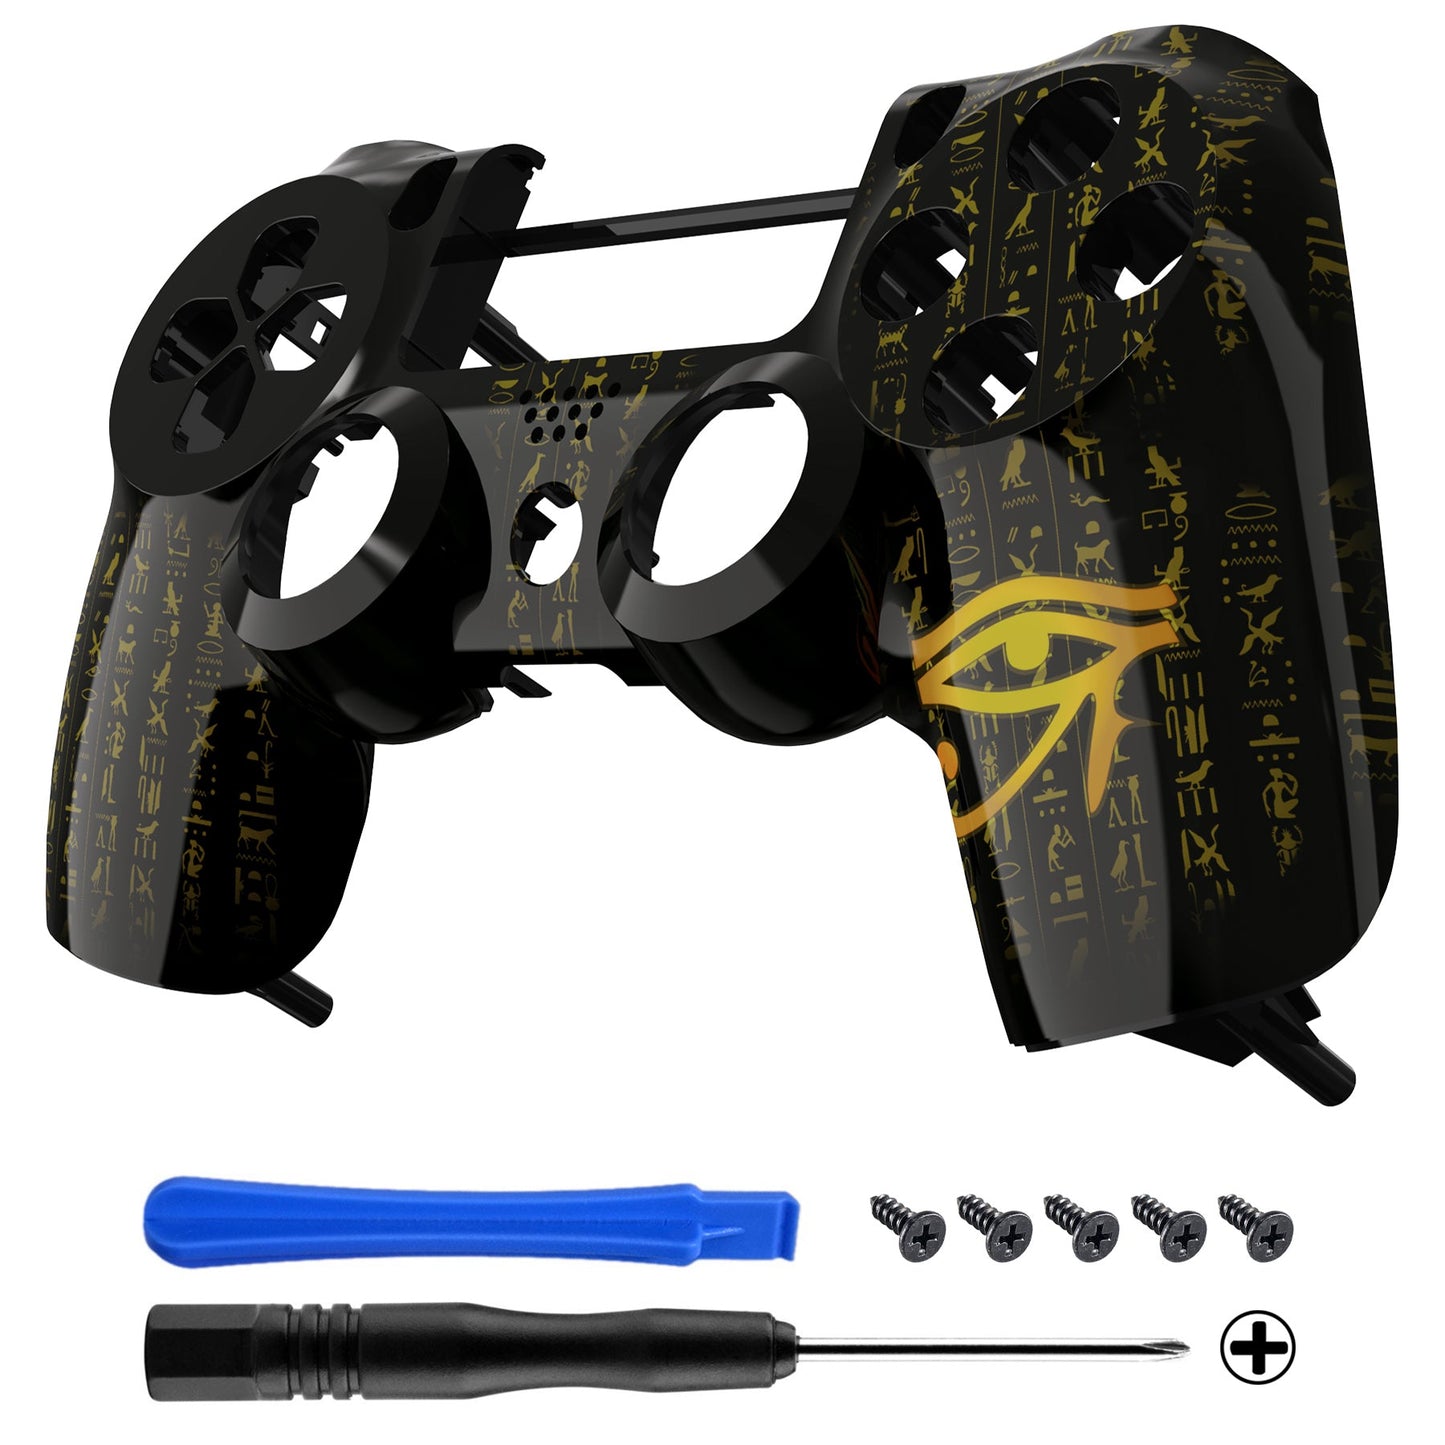 eXtremeRate Retail Eye of Providence Hydro Dipped Front Housing Shell for ps4 Slim Pro Controller JDM-040 JDM-050 JDM-055 - SP4FT21